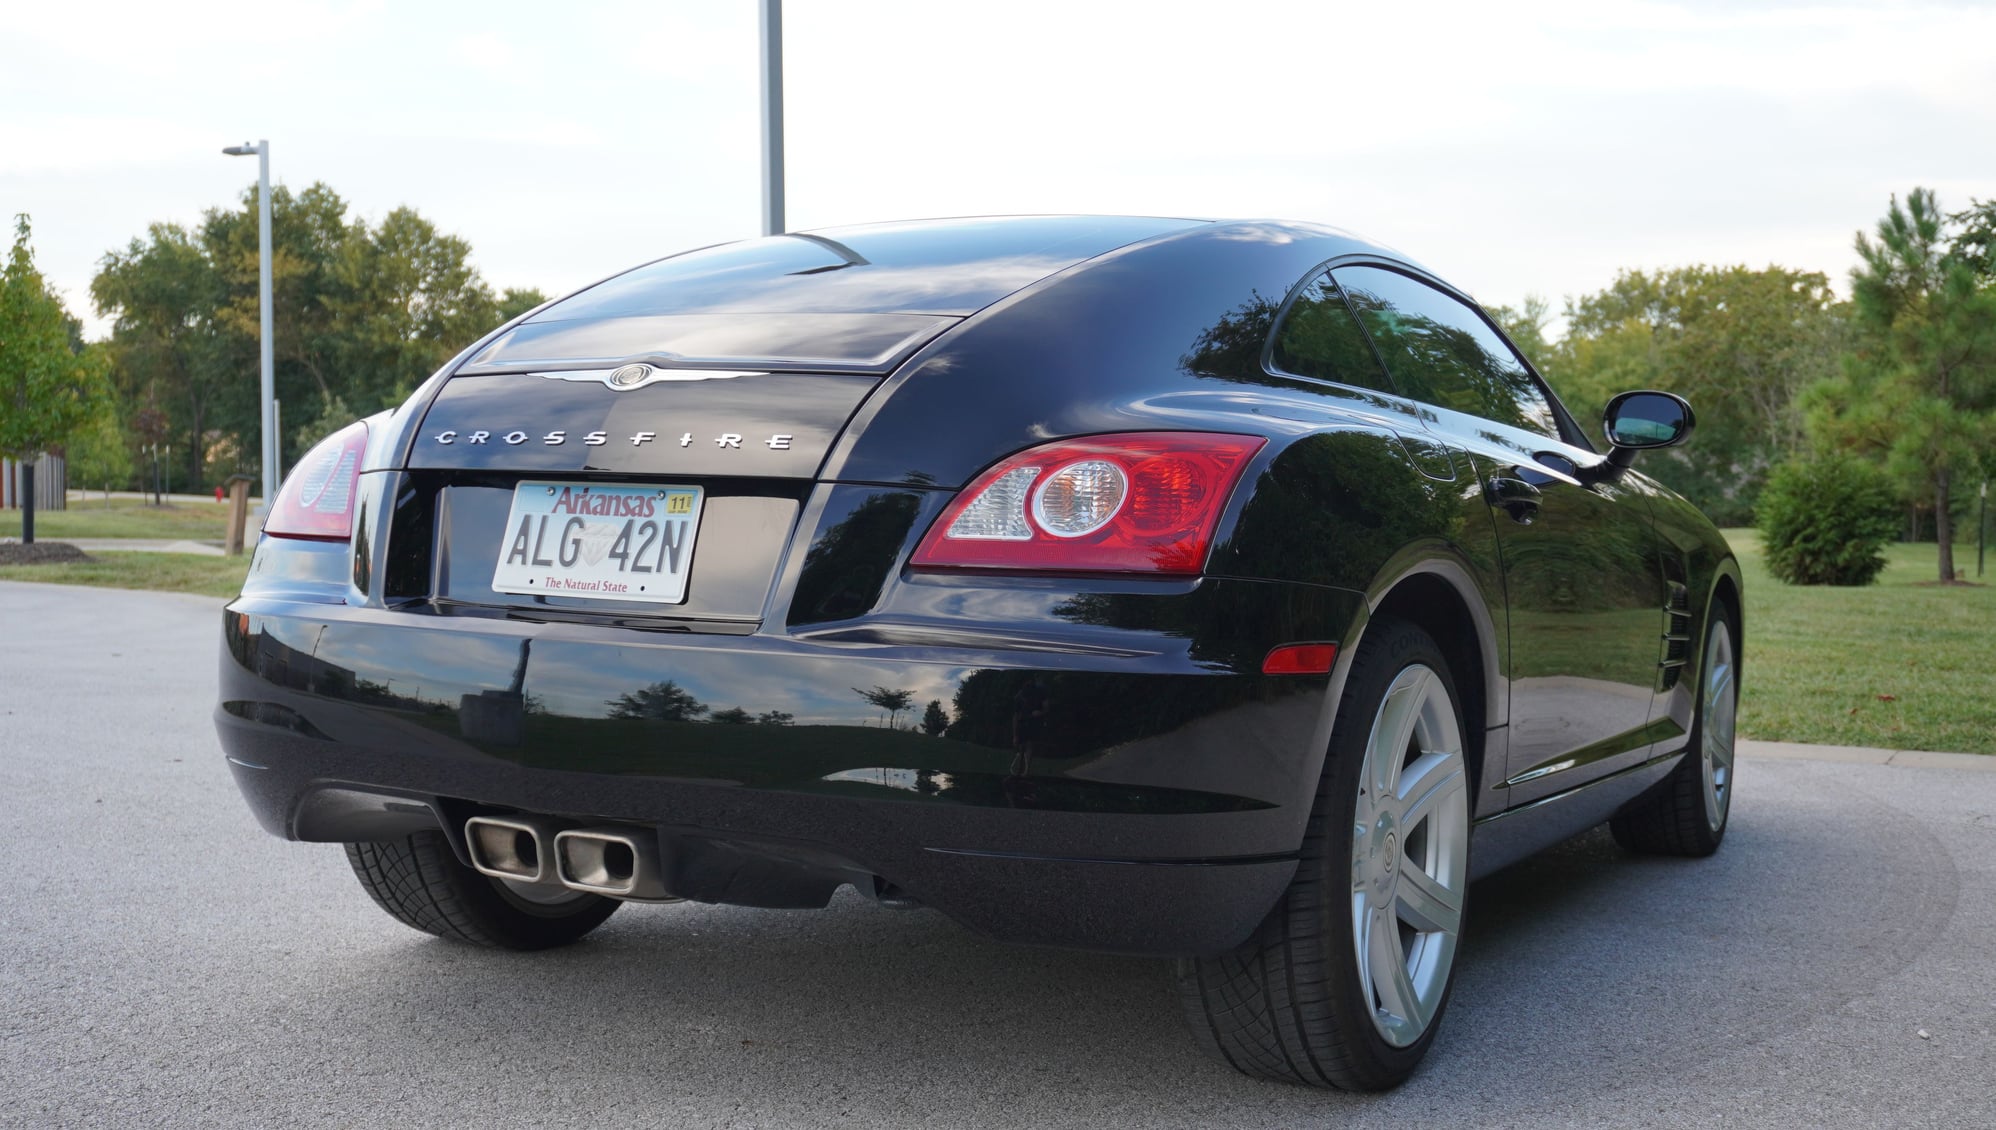 2007 Chrysler Crossfire - 2007 Crossfire Coupe 6 Speed Manual - Used - VIN 1C3LN59L87X073454 - 34,500 Miles - 6 cyl - 2WD - Manual - Coupe - Black - Bentonville, AR 72712, United States